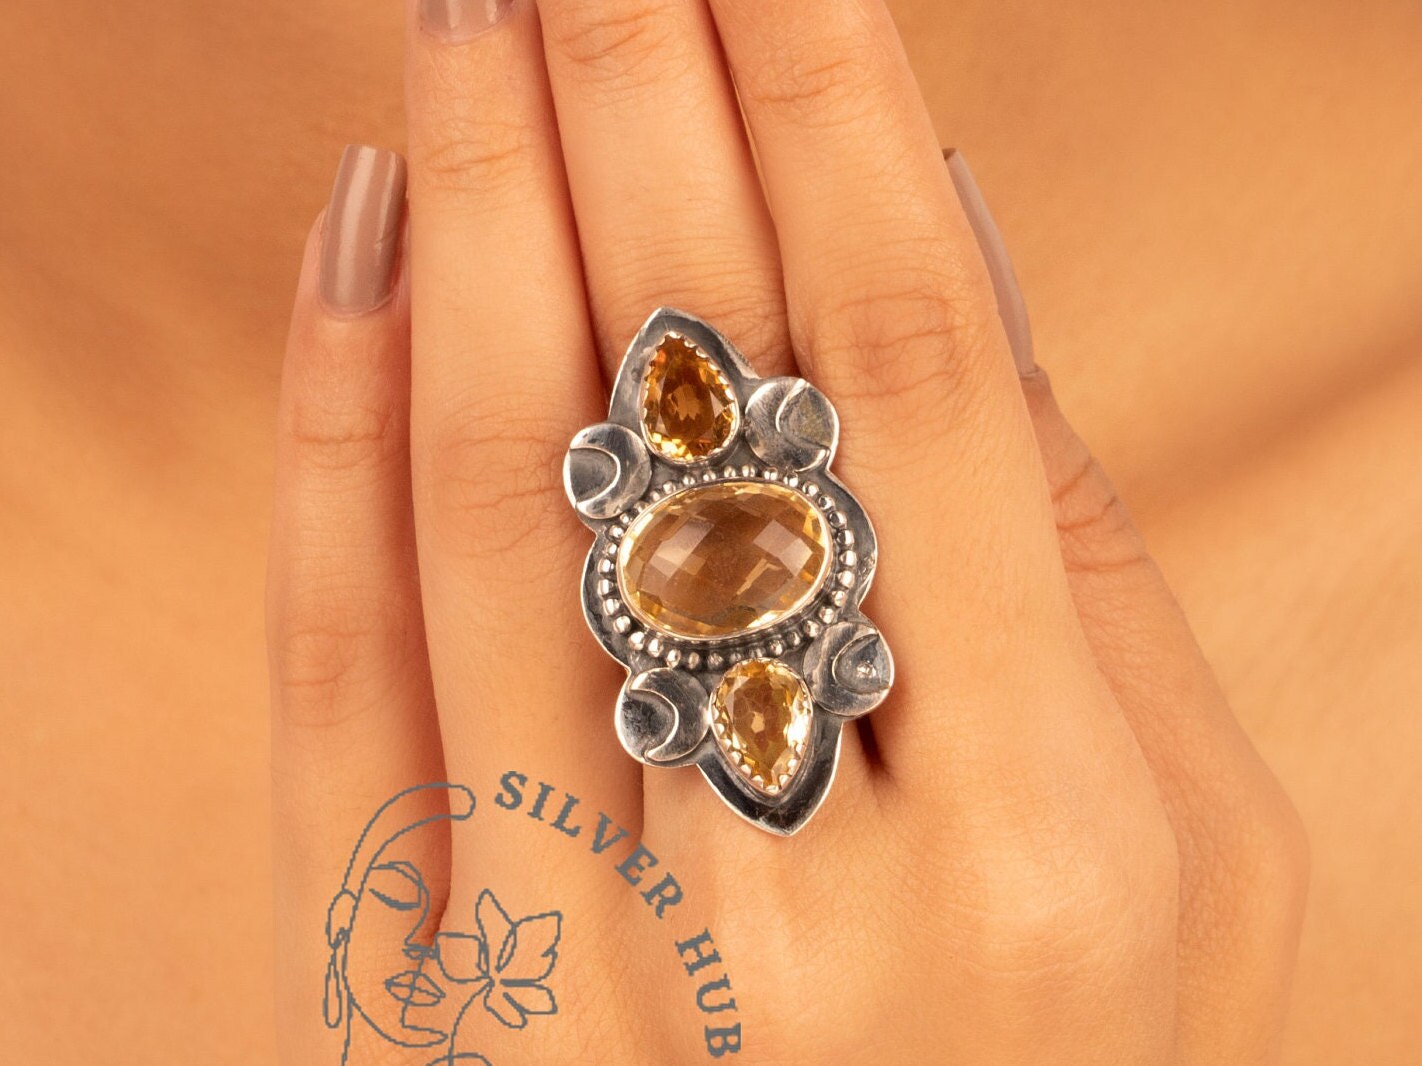 Antique Natural Citrine Ring, Gemstone Ring, Band Ring, 925 Sterling Silver Jewelry, Wedding Gift, Ring For Wife